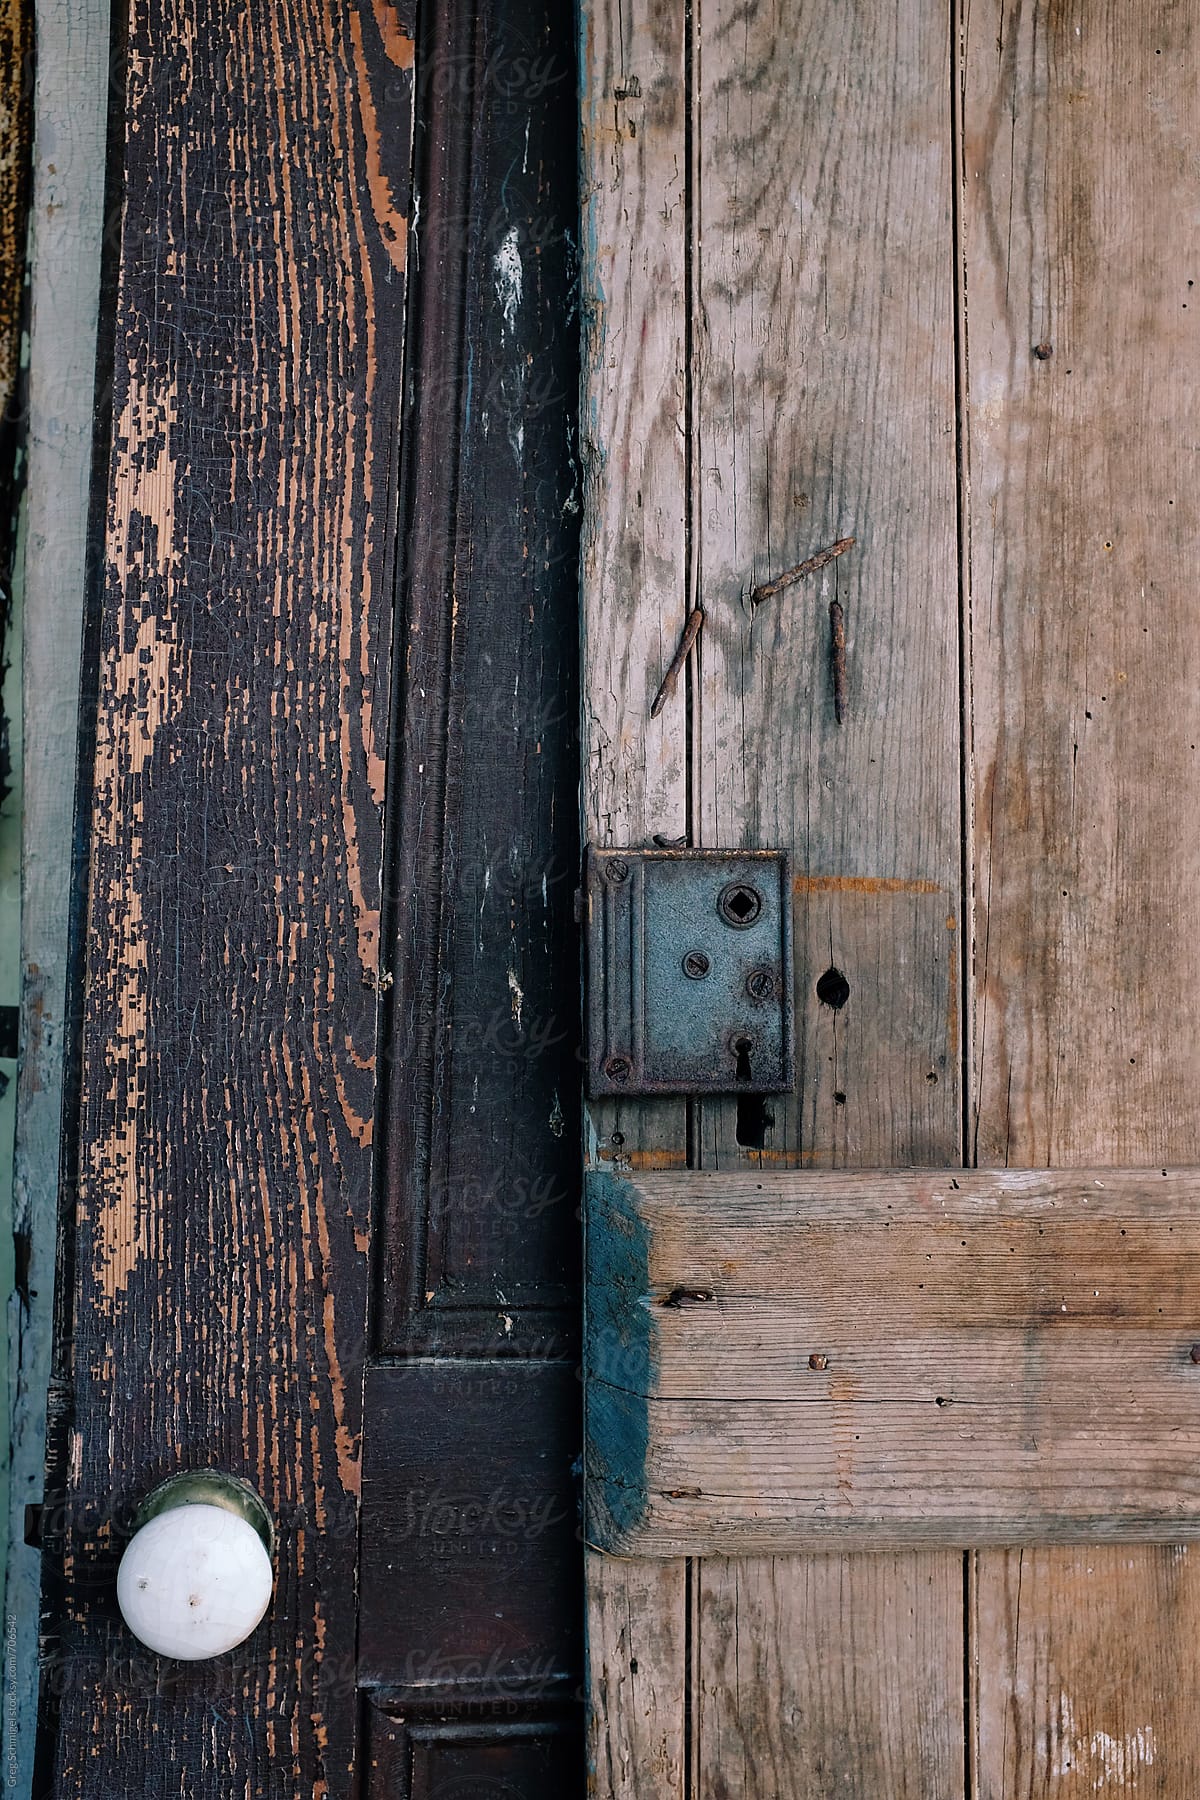 Textures of old wooden doors with ornately carved details